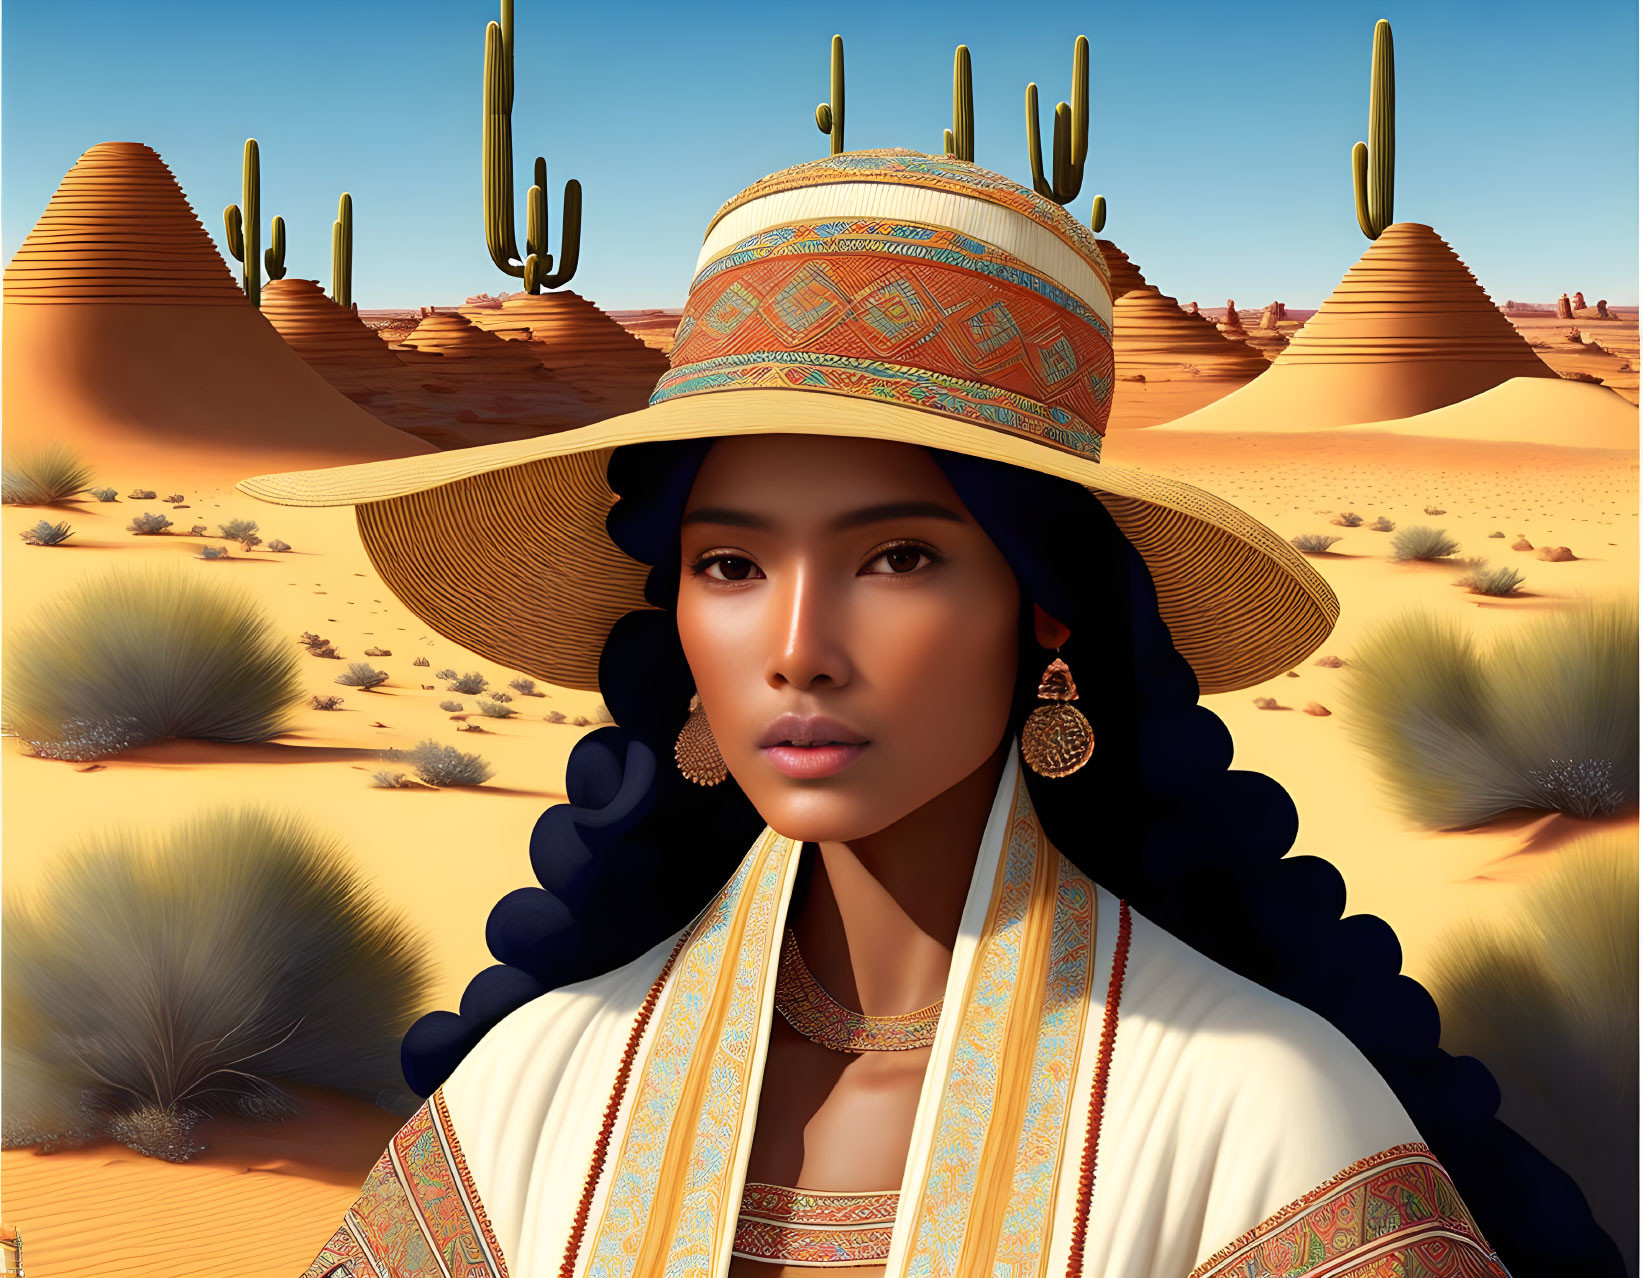 Woman in the dessert